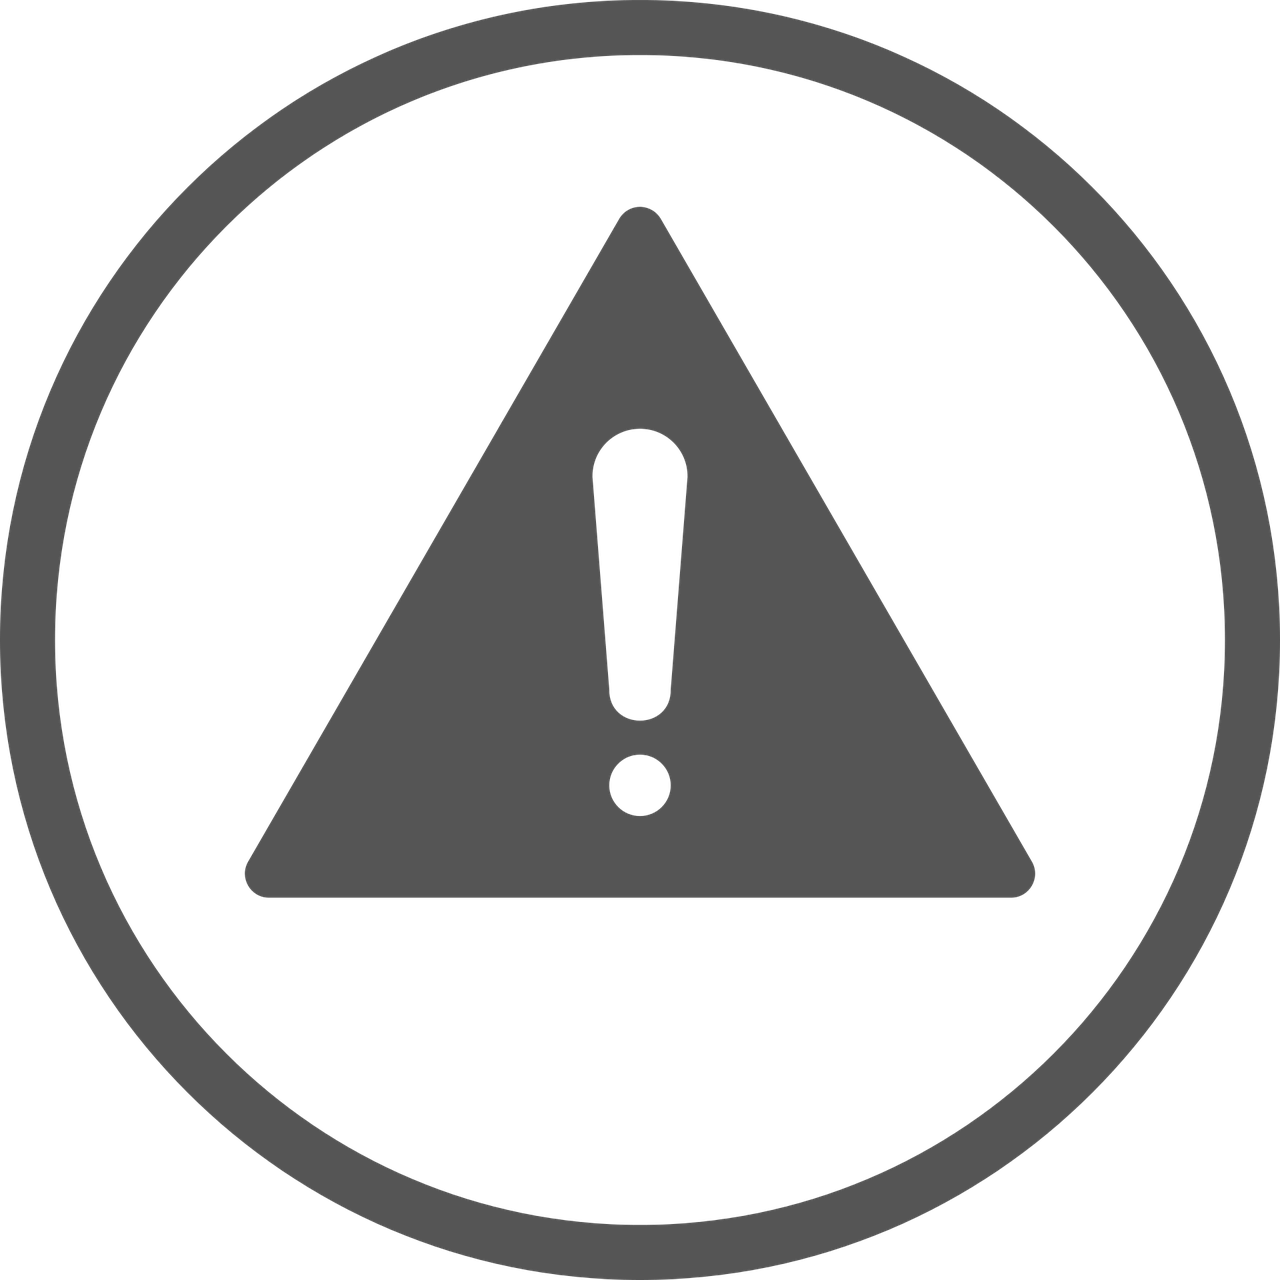 a warning sign in a circle on a black background, a picture, pixabay, black and white logo, highly [ detailed ], triangle inside circle, error